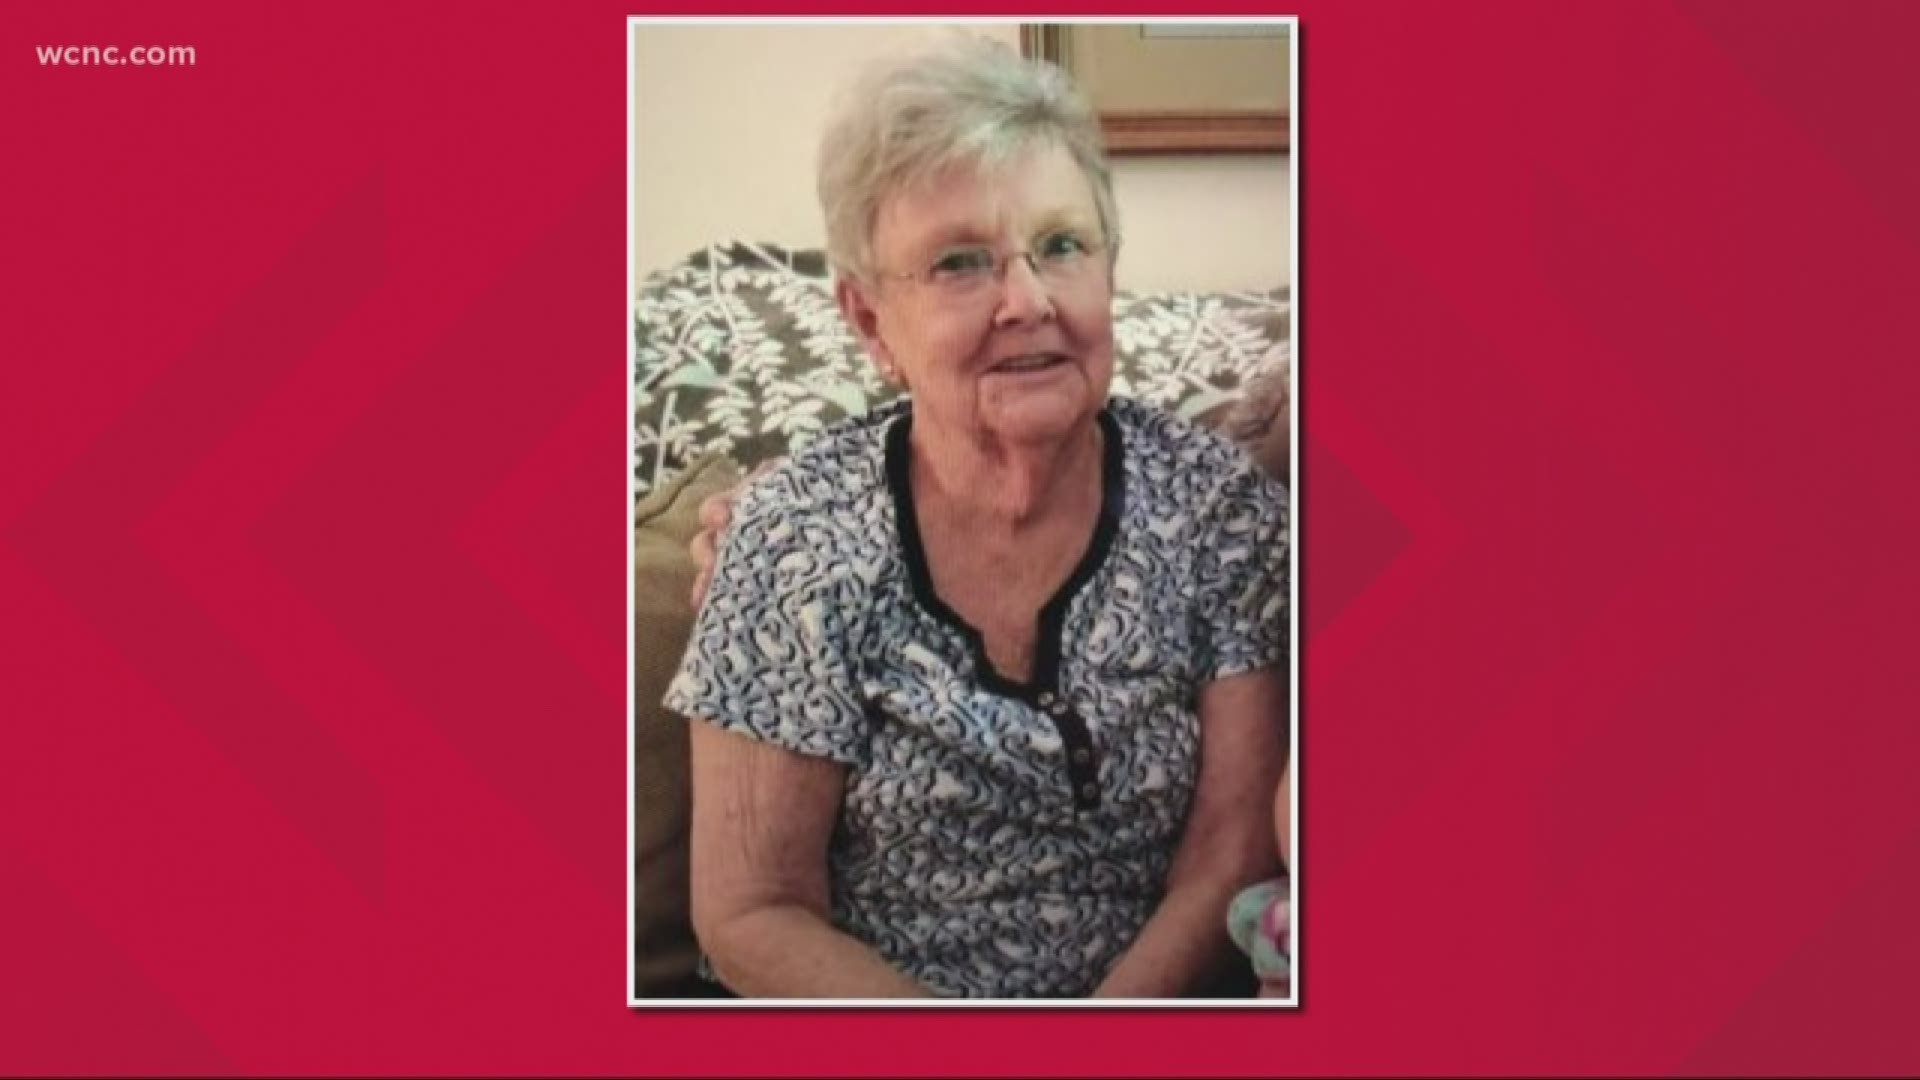 Joan Byrdic, 82, was last seen at PruittHealth off Herlong Ave. in Rock Hill visiting a family member.